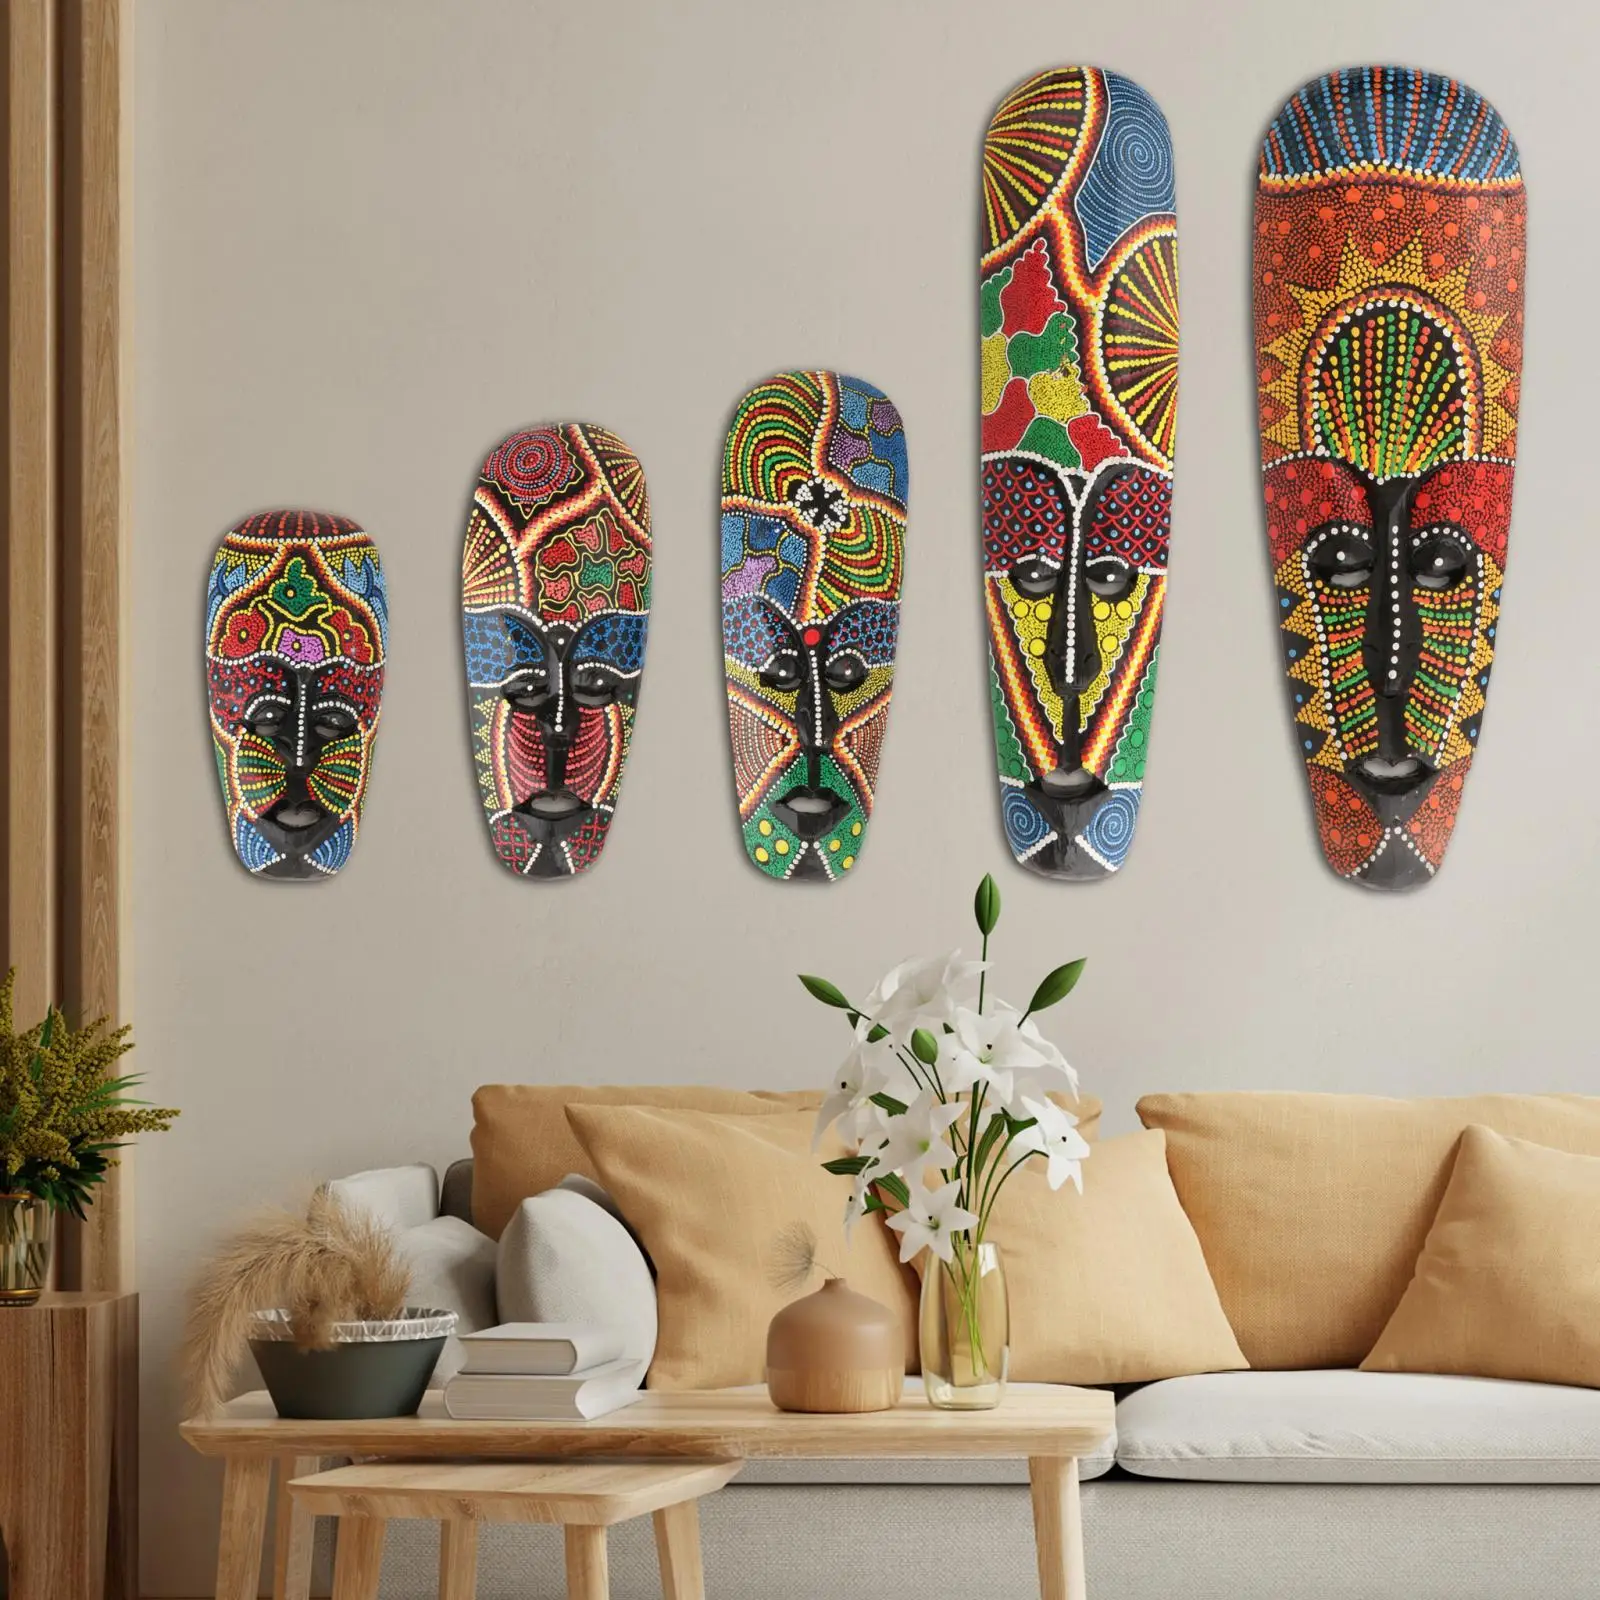 African Wall Hanging Decor African Crafts for Kitchen Bedroom Garden Home